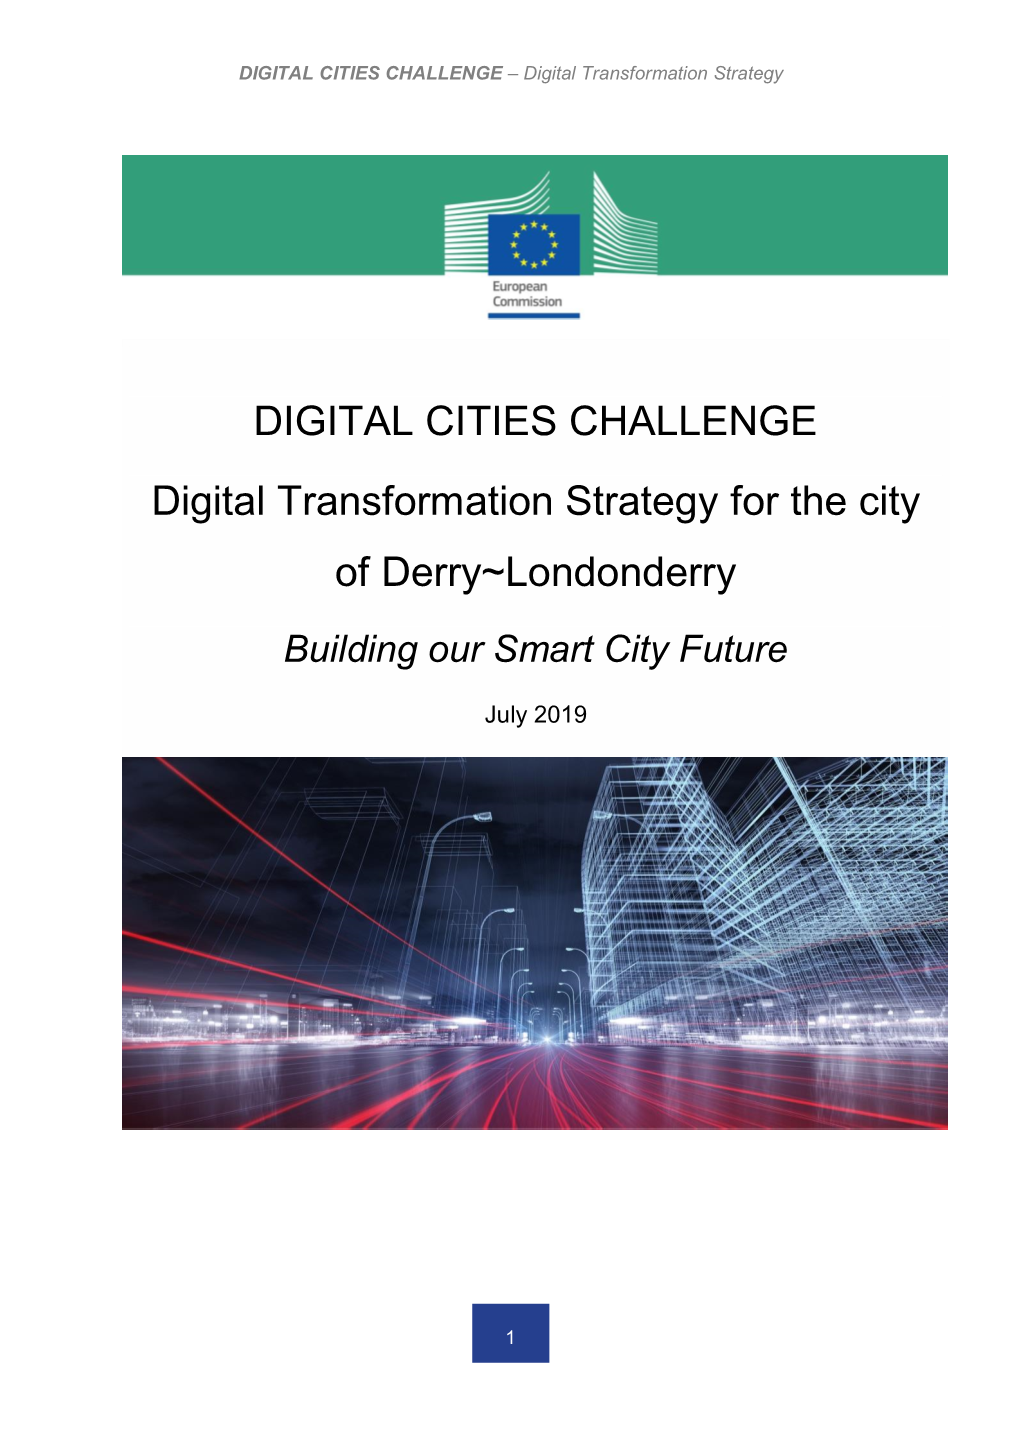 DIGITAL CITIES CHALLENGE Digital Transformation Strategy for the City of Derry~Londonderry Building Our Smart City Future